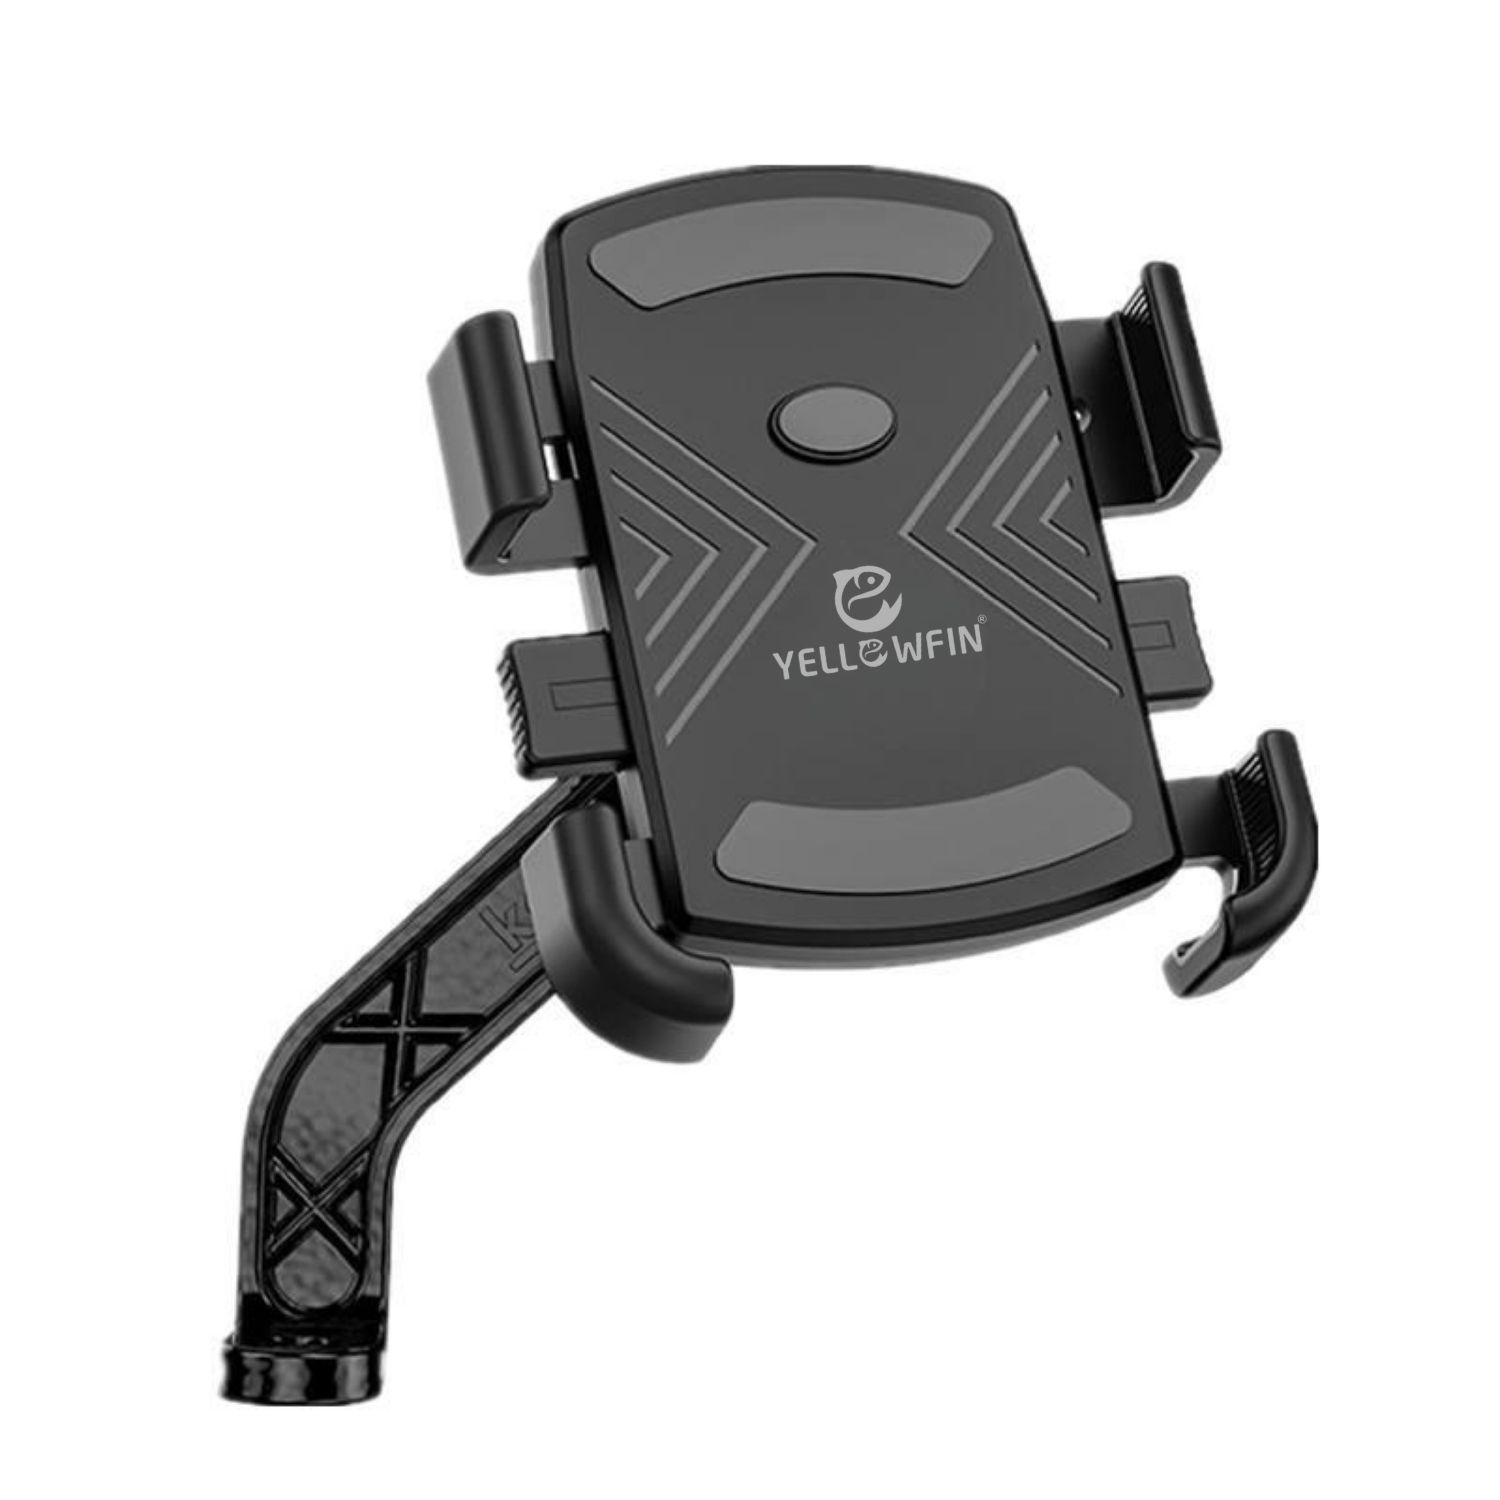 YELLOWFIN Quick Release Button Controlled Mobile Holder for Bikes | Scooters | Motorcycles Mirror Mount – Auto Locking, Anti-Shaking, Anti-Fall, Firm Grip – for Maps and GPS Navigation (M16-B-Black)